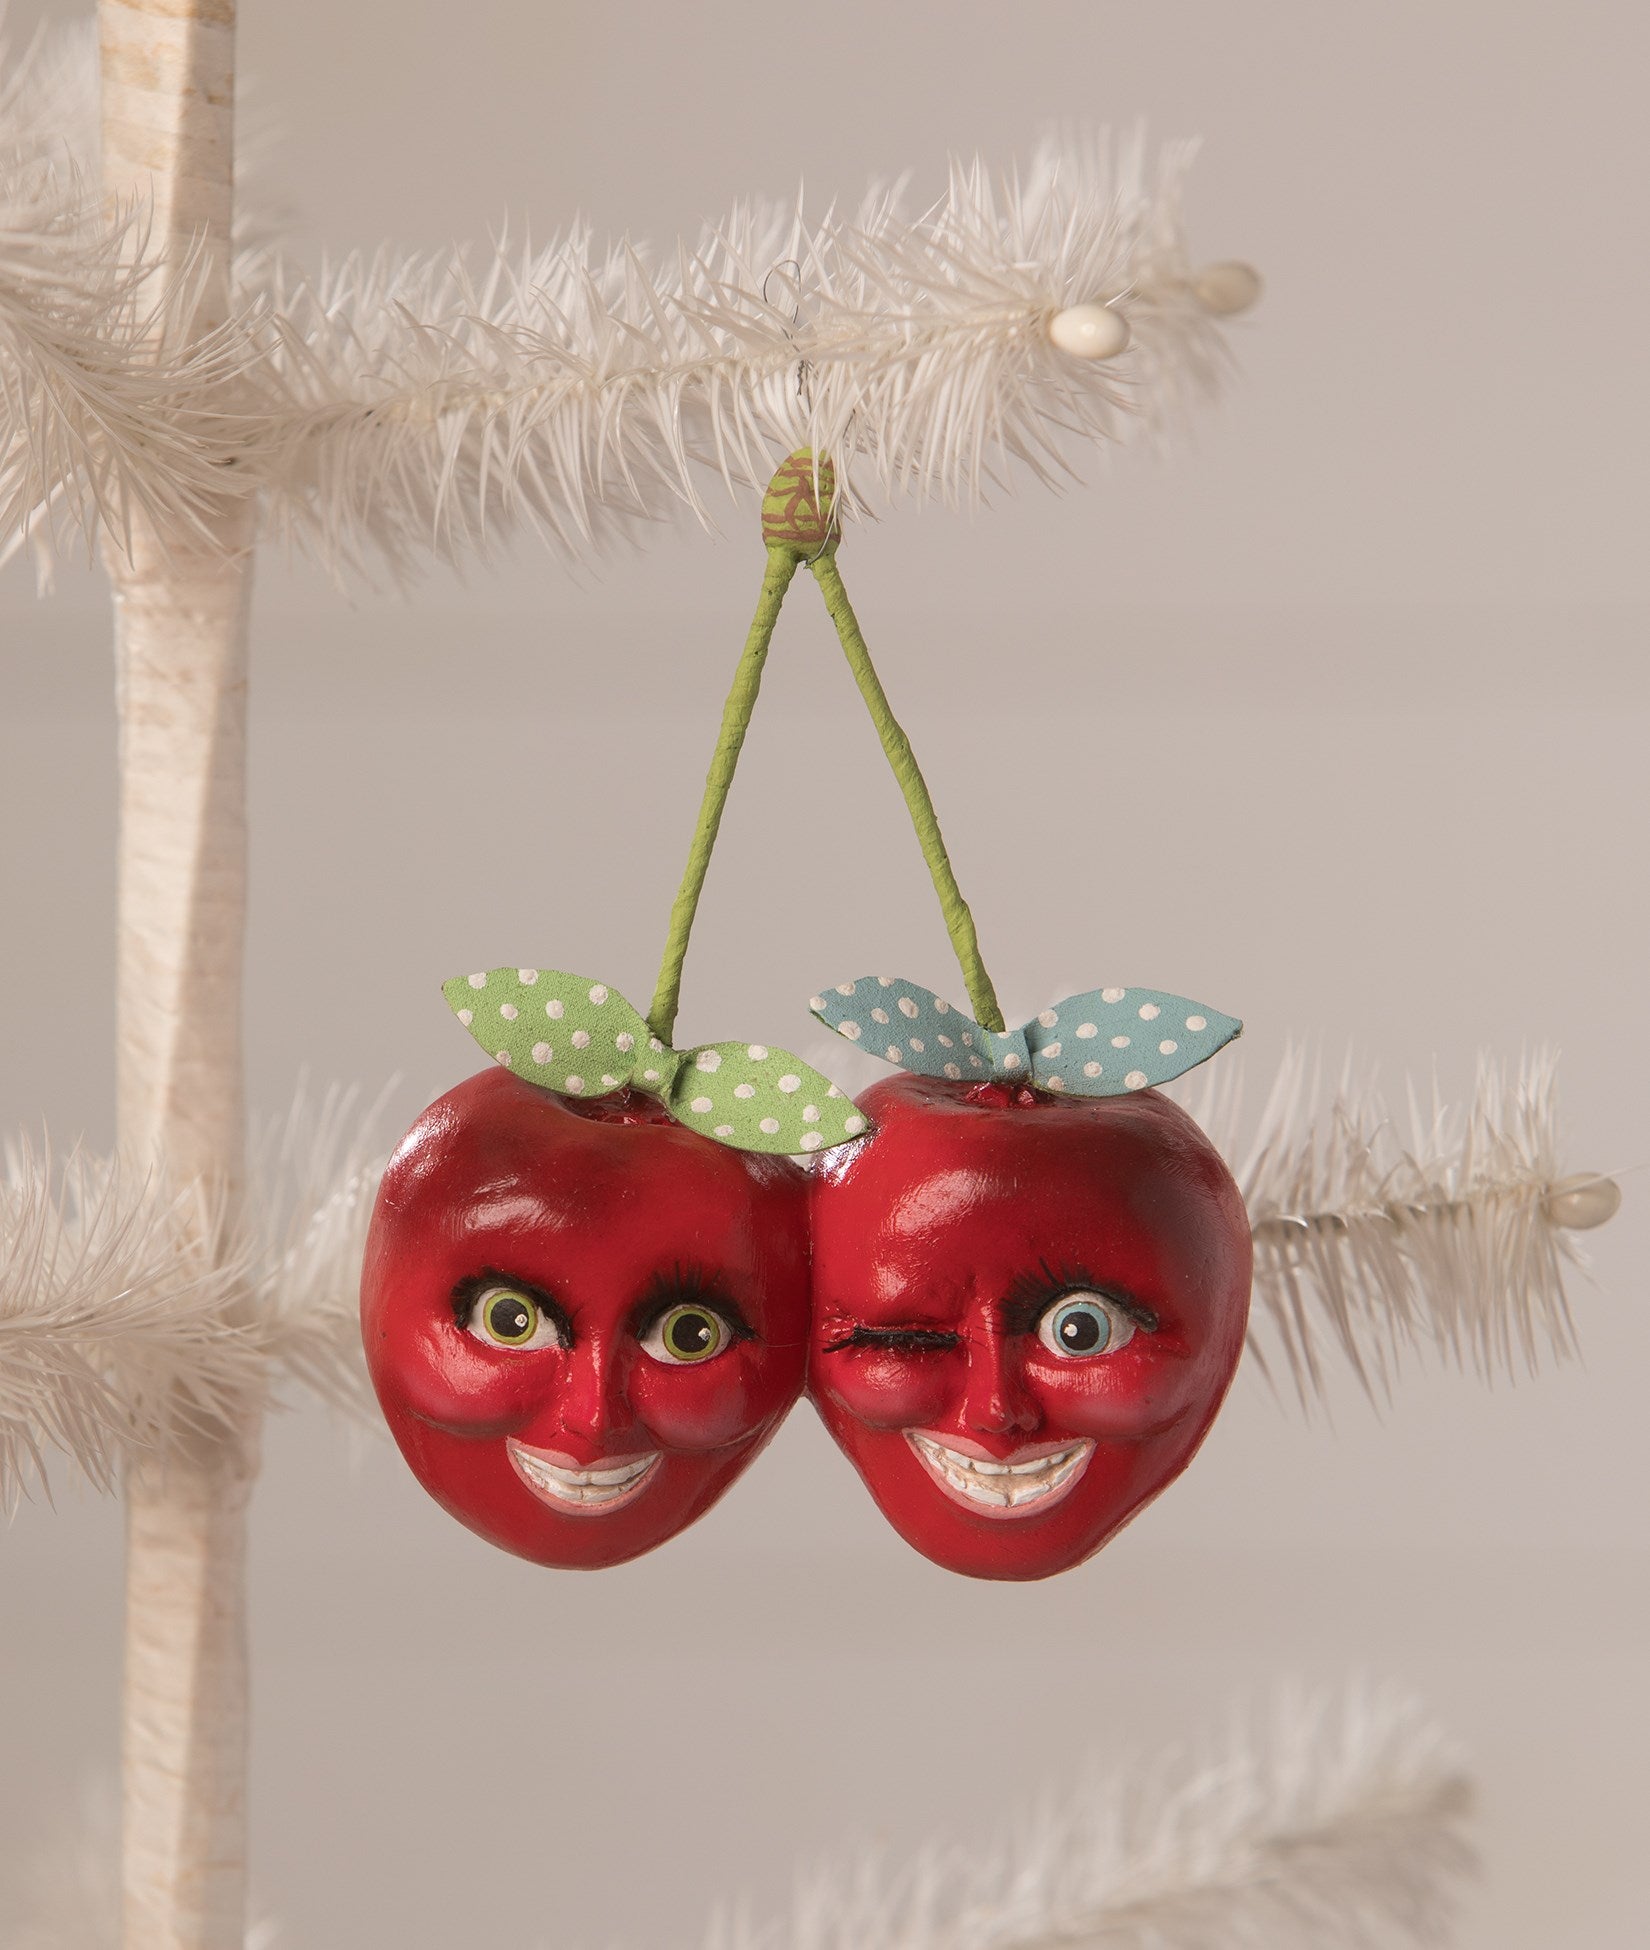 Fruity Cherries, Cherry Ornament with Faces by Bethany Lowe